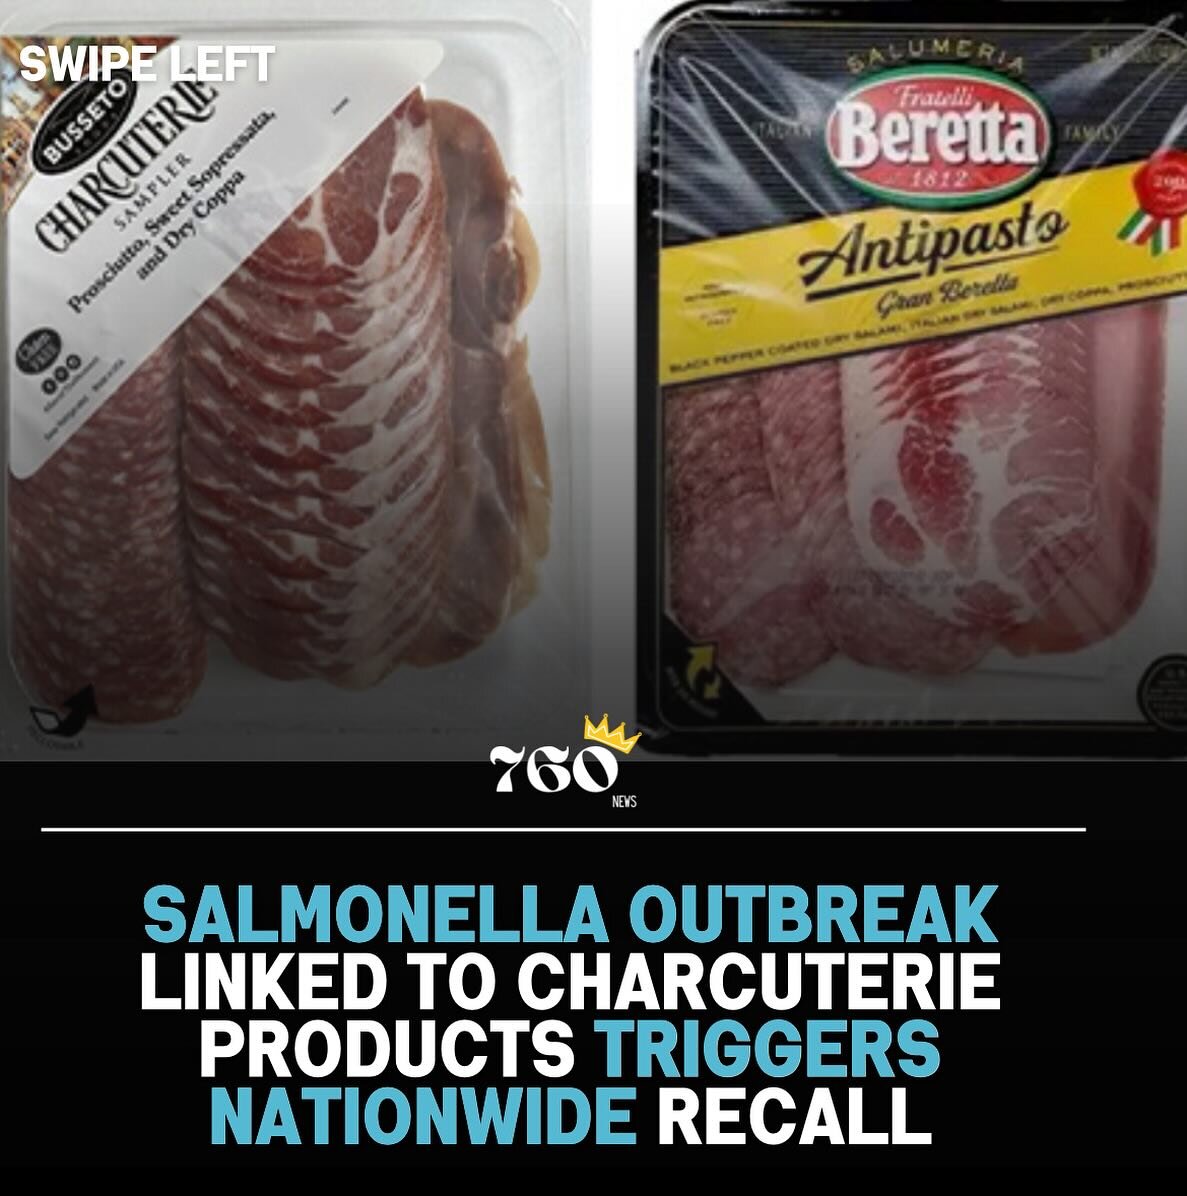 For the full story, please view my story or copy and paste the link below

Full story: https://www.760news.org/health/salmonella-outbreak-linked-to-charcuterie-products-triggers-nationwide-recall

#SalmonellaOutbreak #FoodSafety #RecallAlert #PublicH